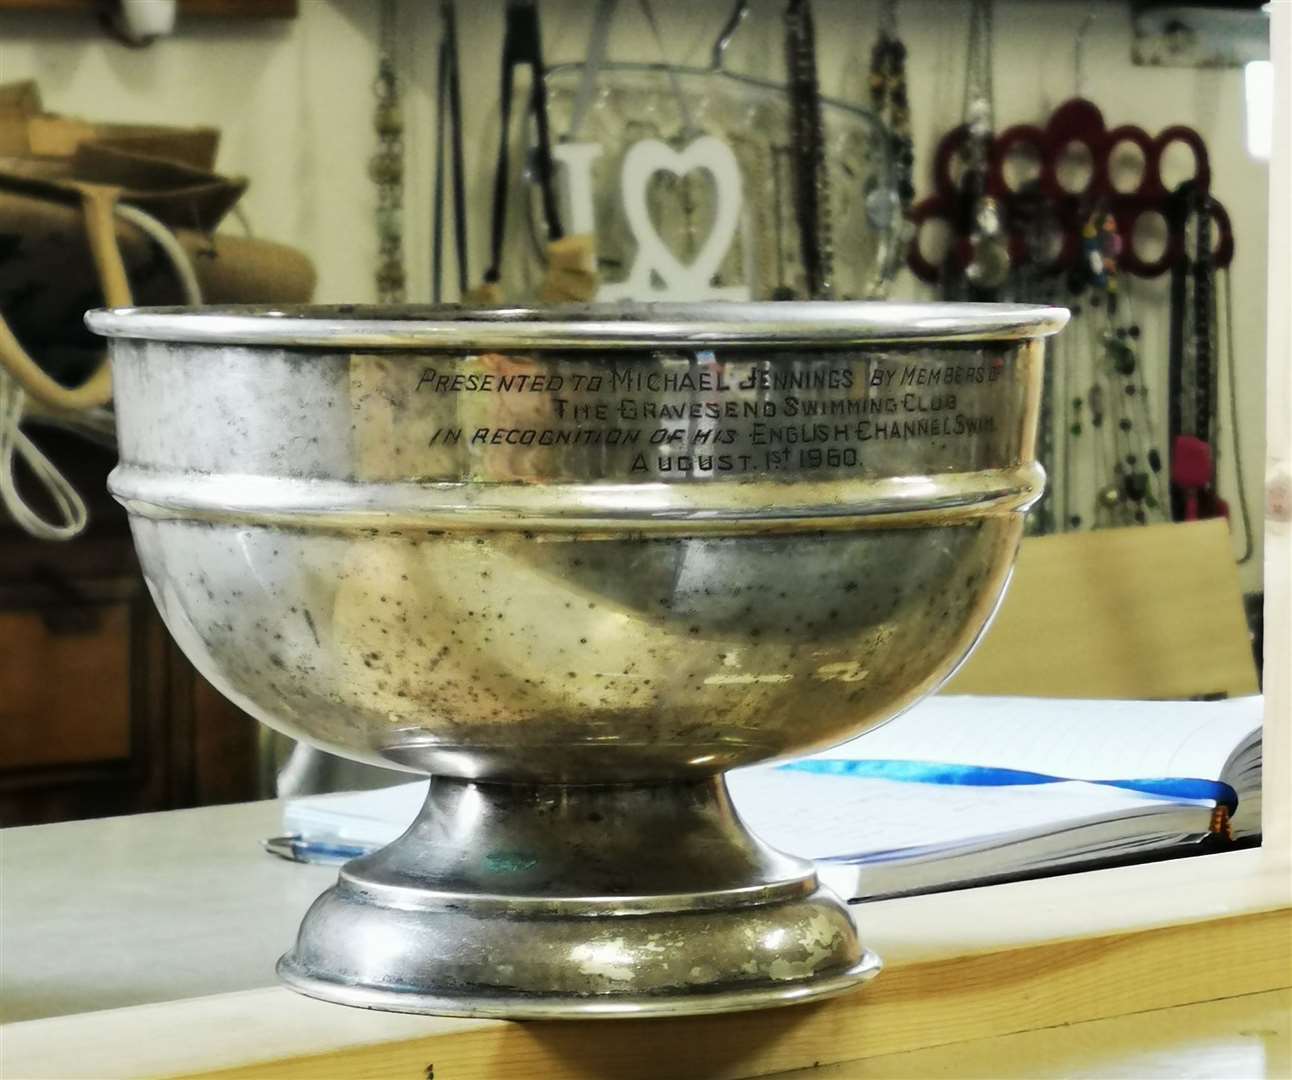 The rose bowl trophy was awarded to Michael in 1960 but had been missing for 50 years after he and his first wife separated in 1970. Picture: Michael Jennings